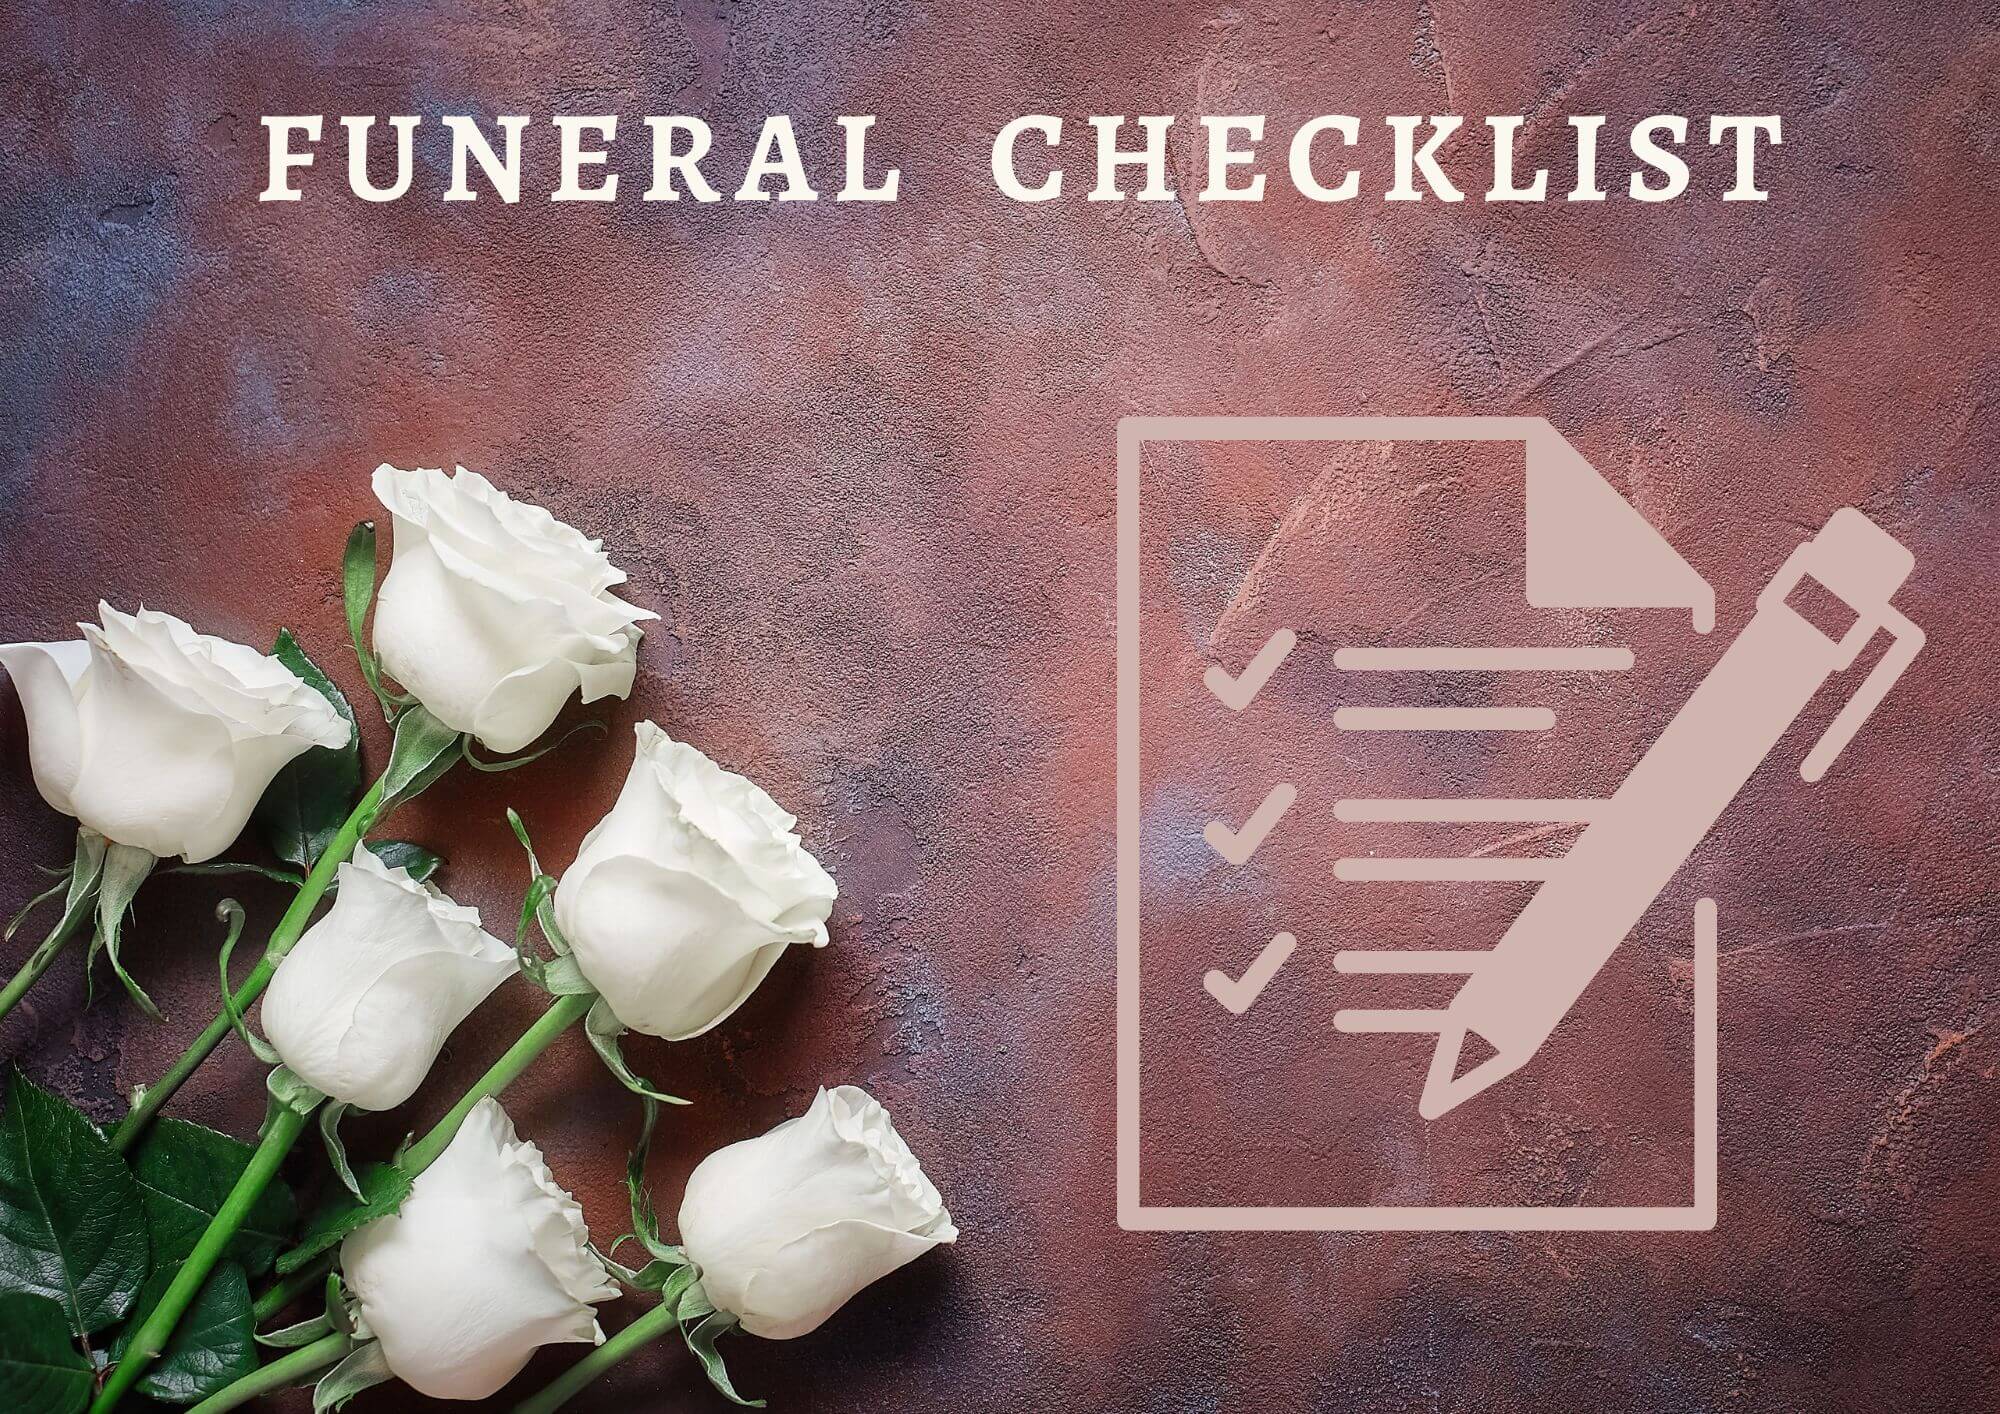 The most important Funeral Checklist